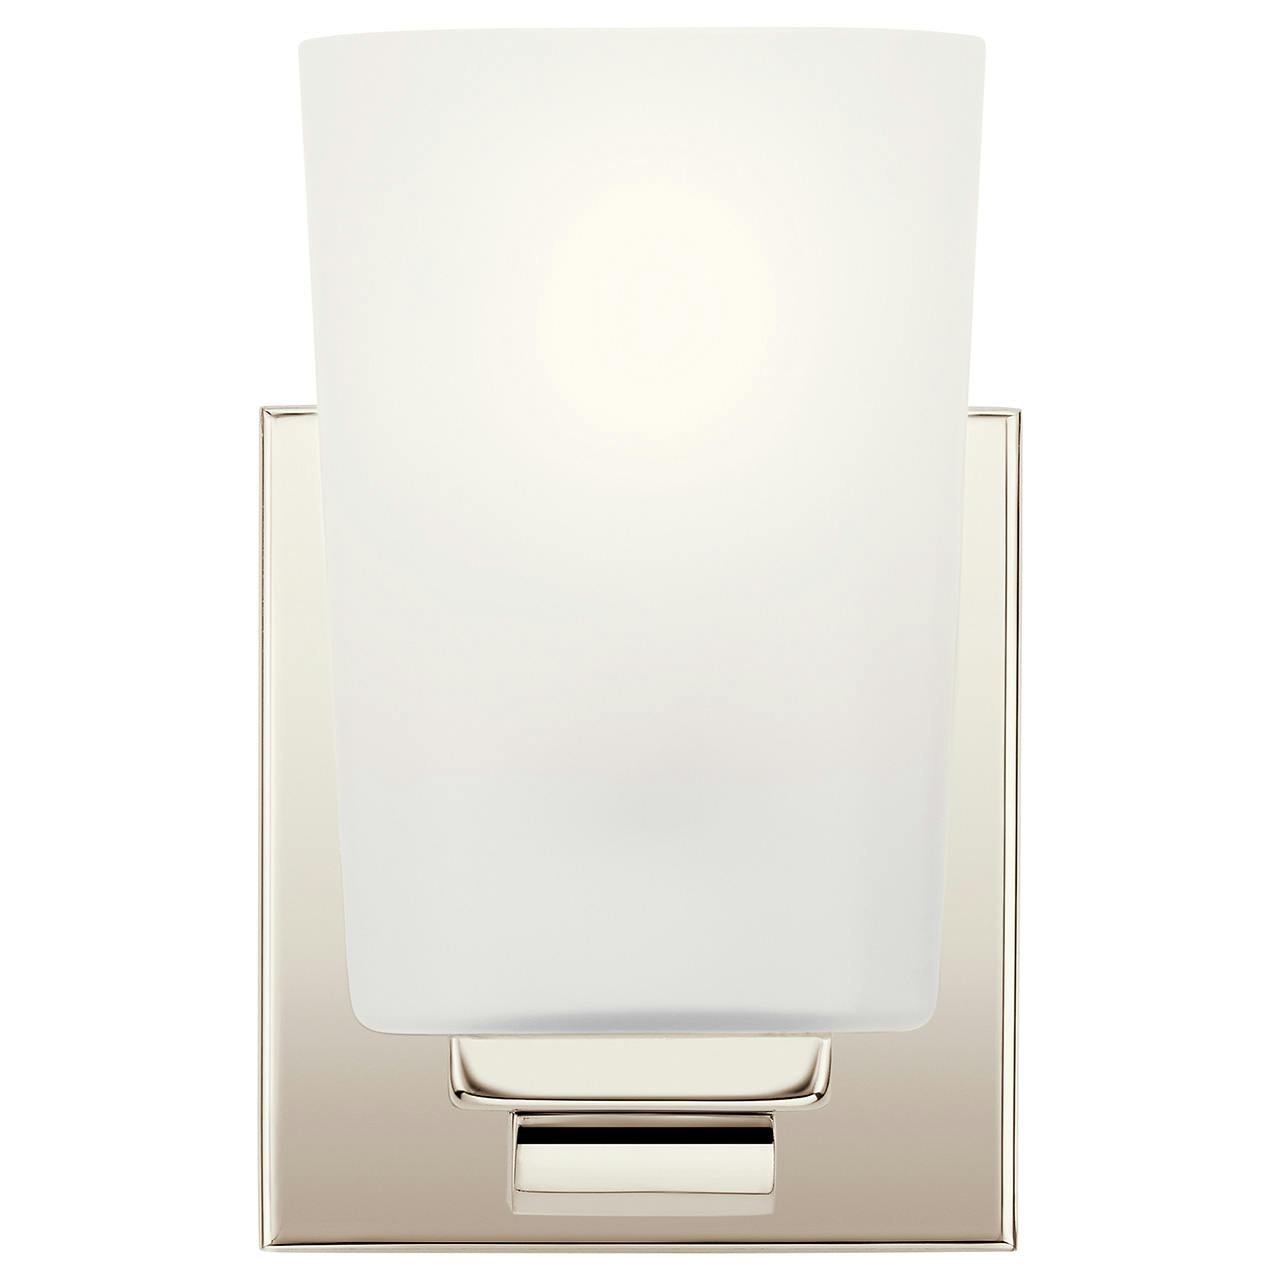 The Roehm 1 Light Wall Sconce Polished Nickel facing up on a white background